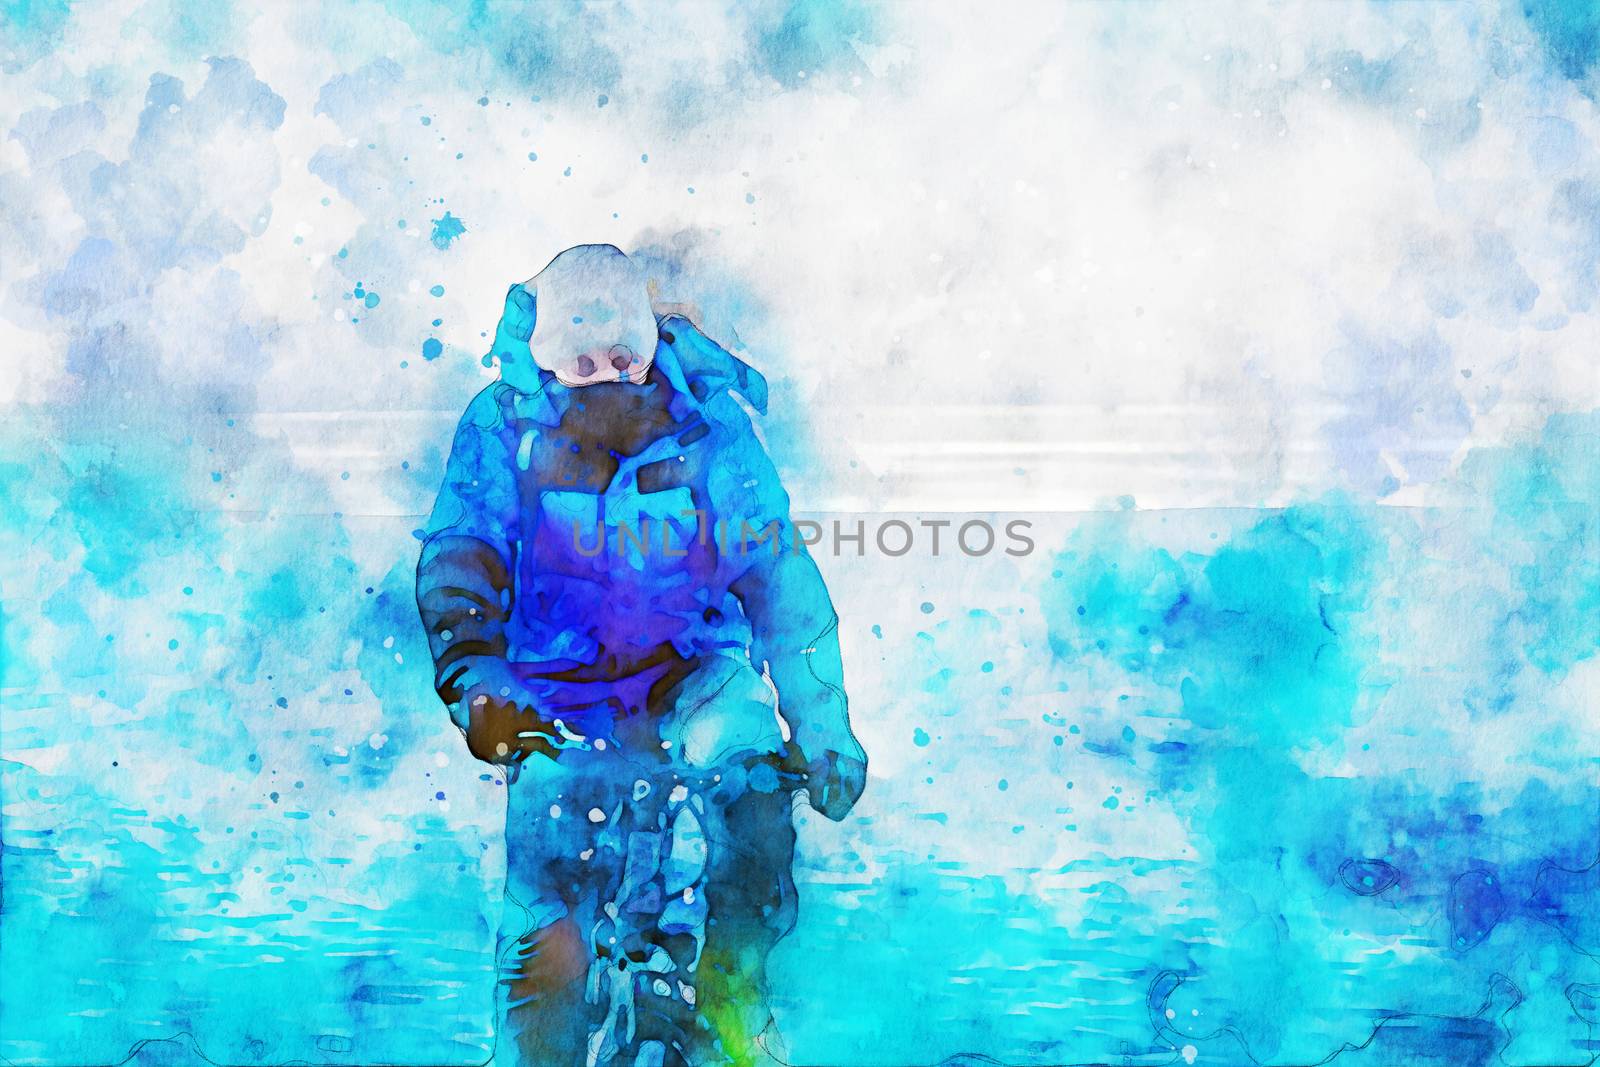 Man riding bicycle alone on ice at frozen lake in winter, digital watercolor painting